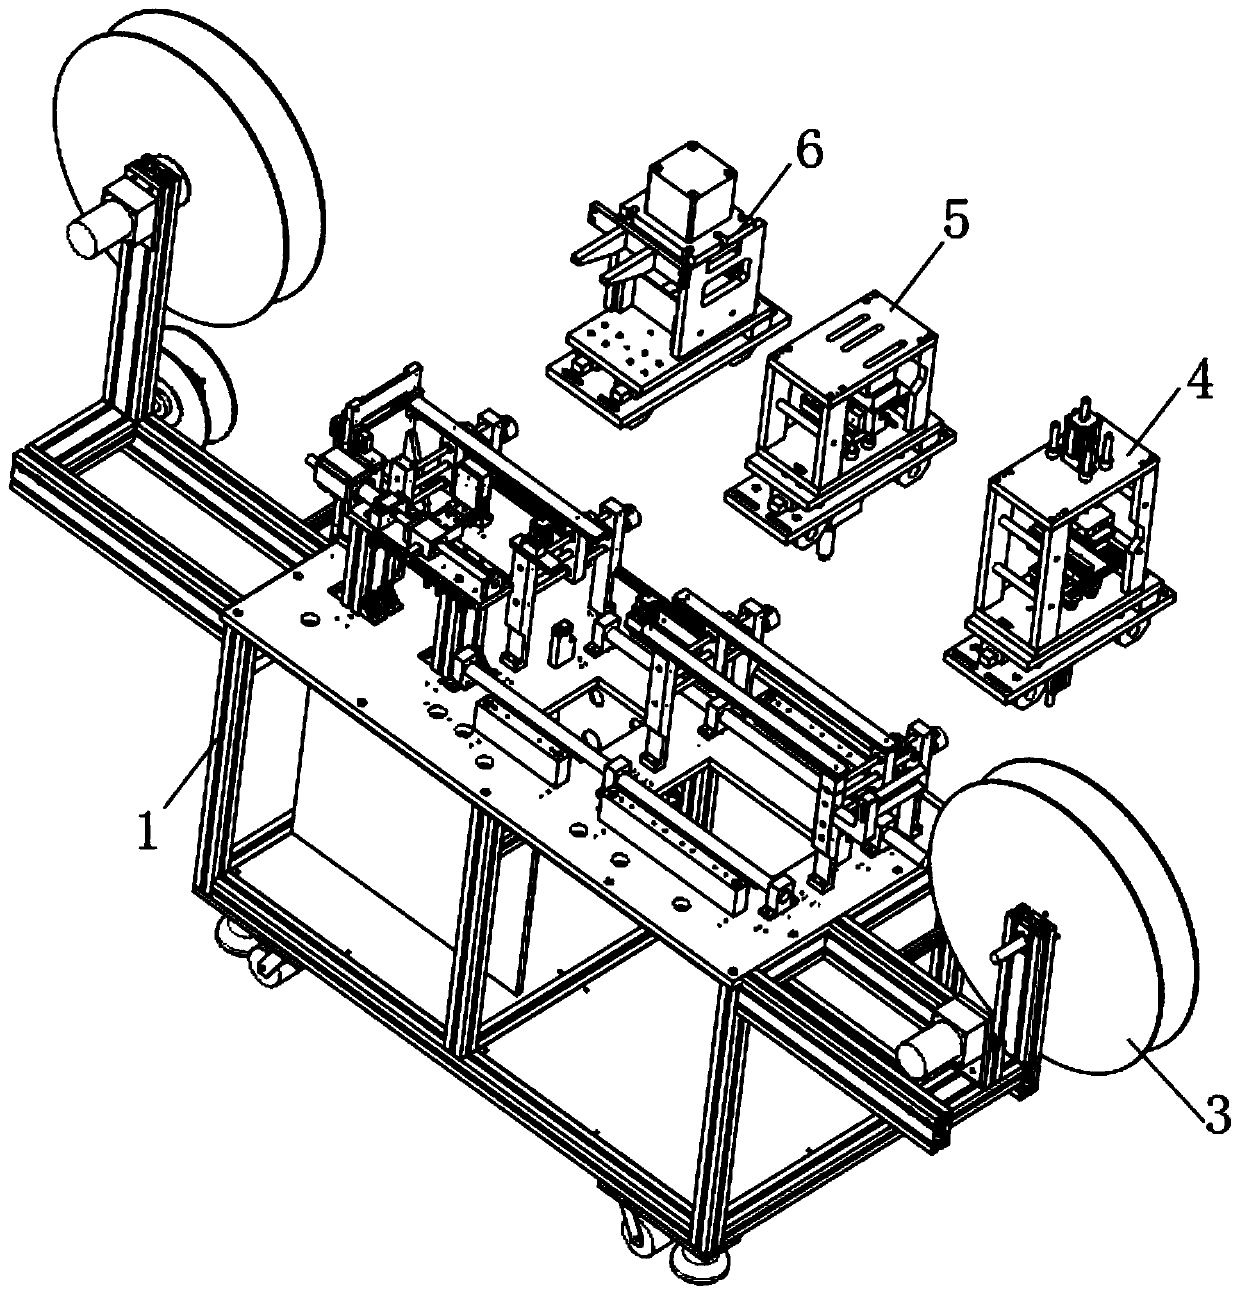 A printing and dyeing processing adjustment device for the side panel of the mechanical arm of an industrial robot